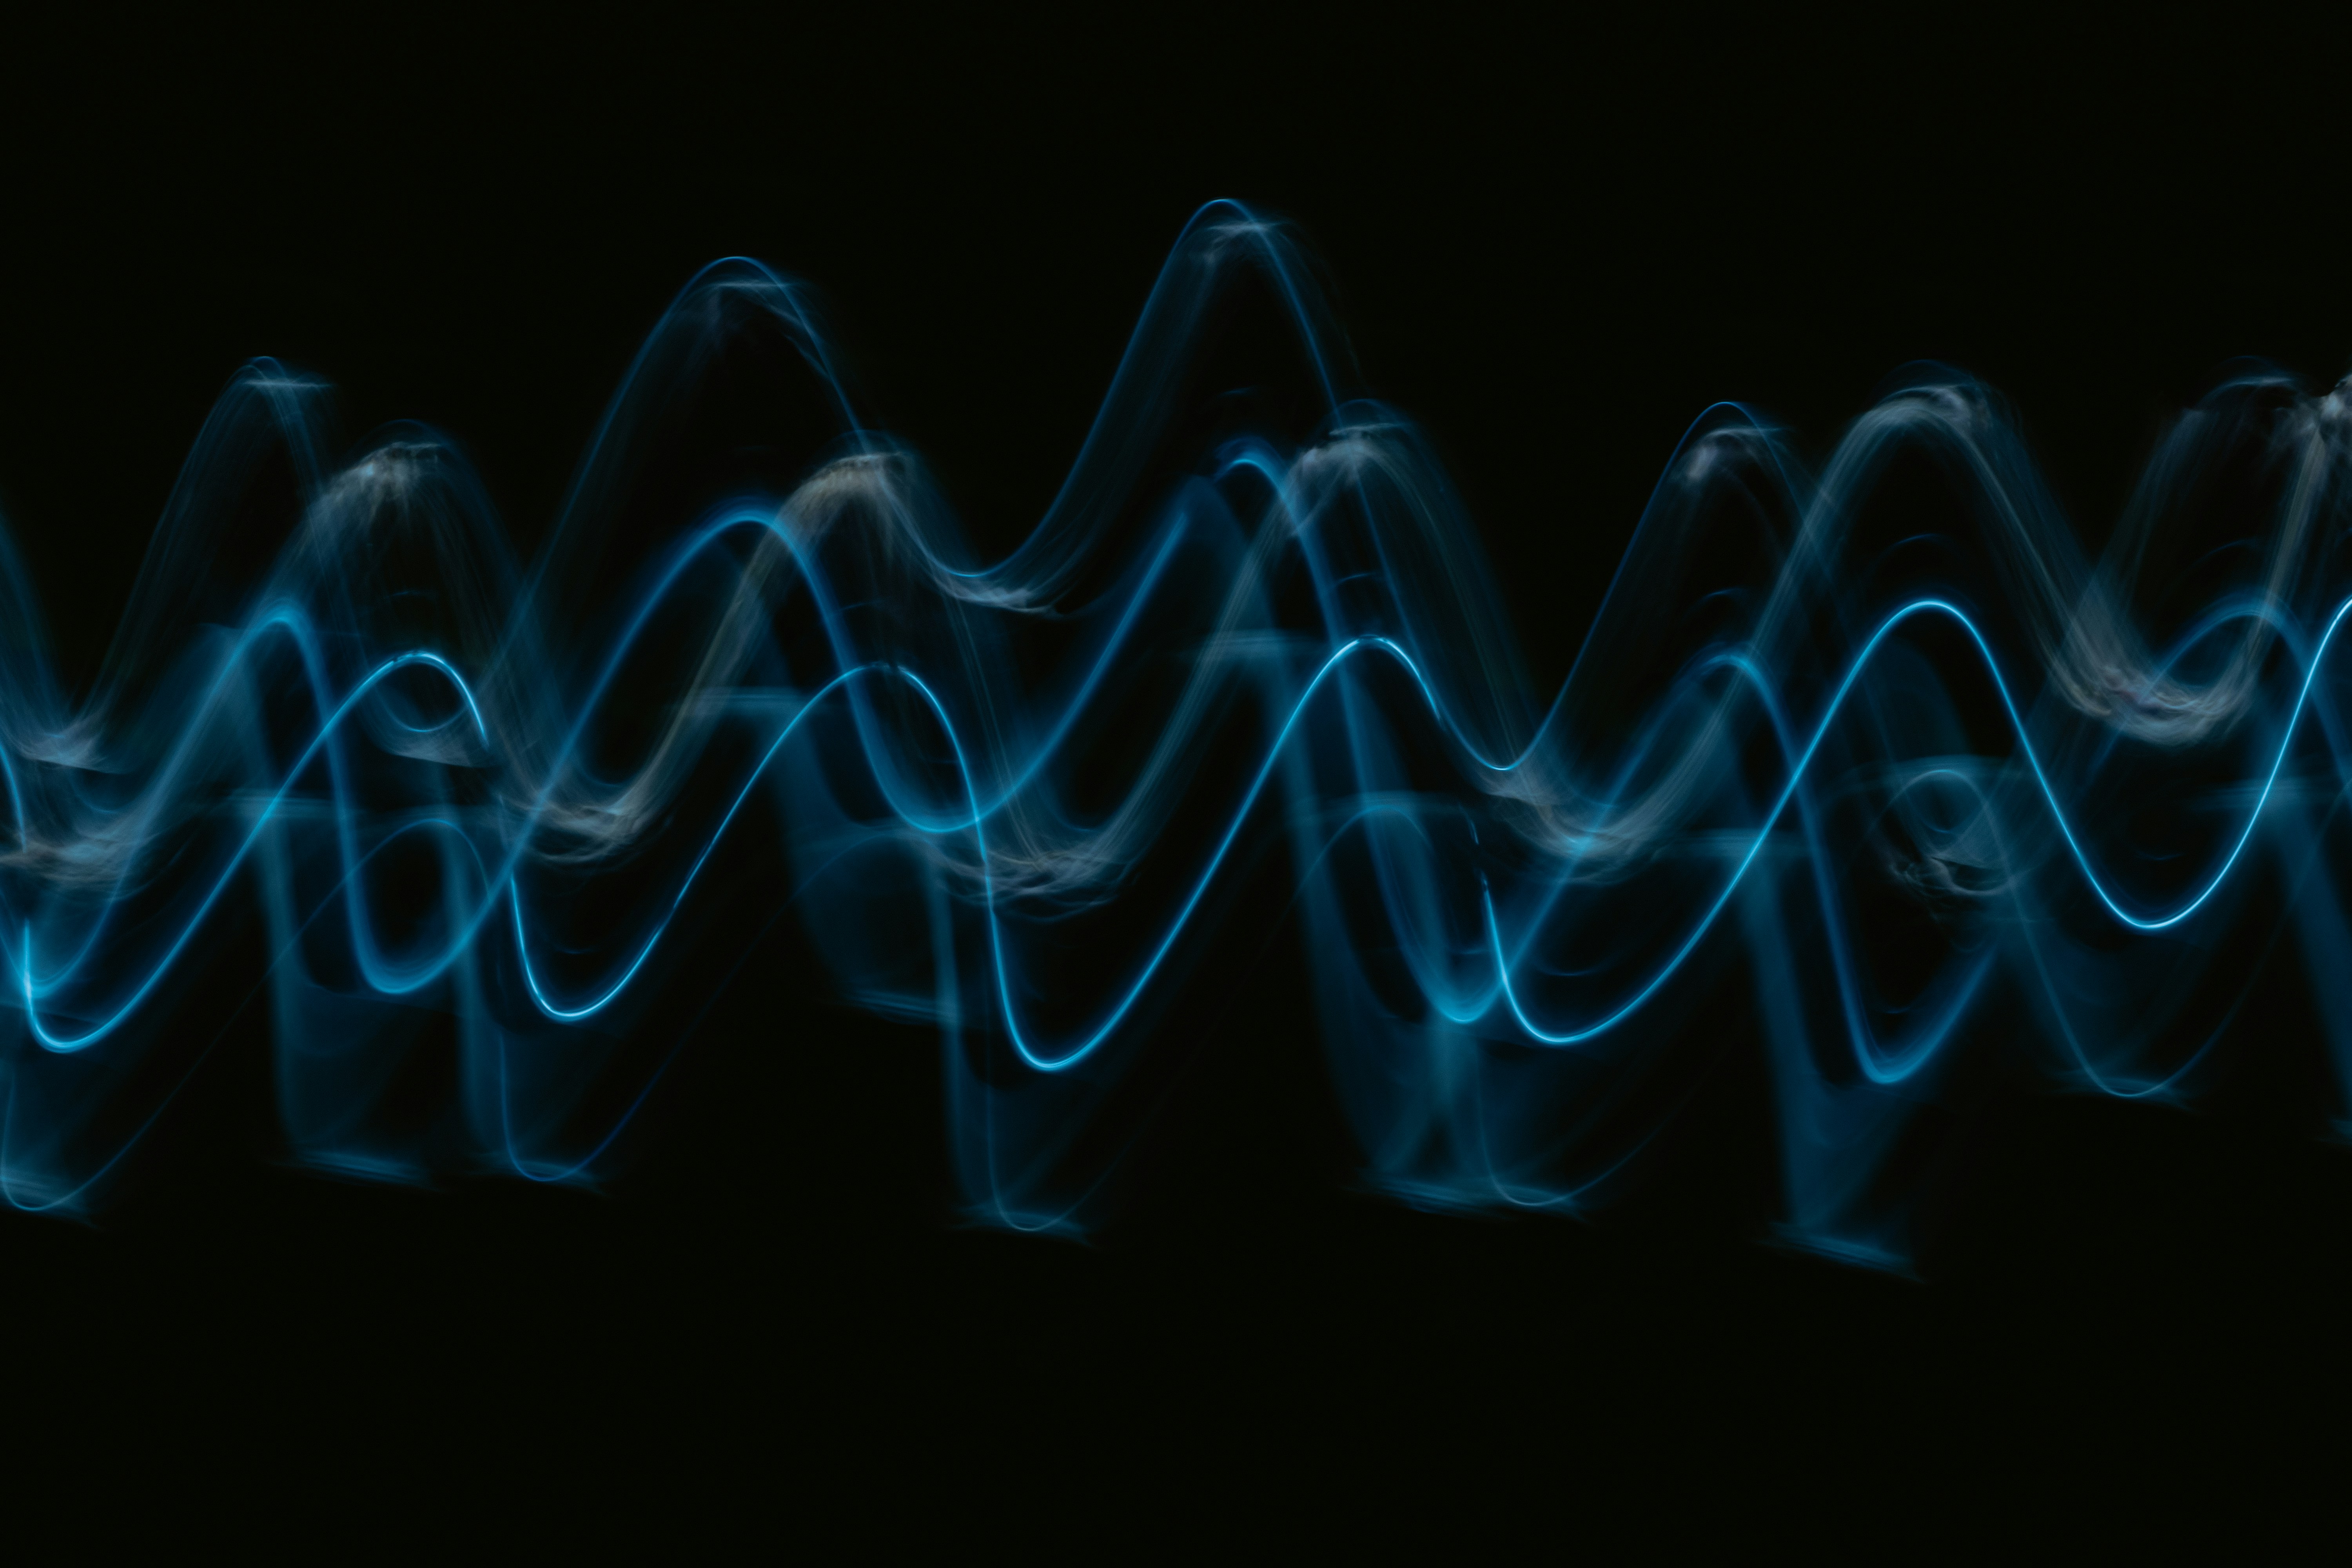 An abstract representation of soundwaves, green on a black background